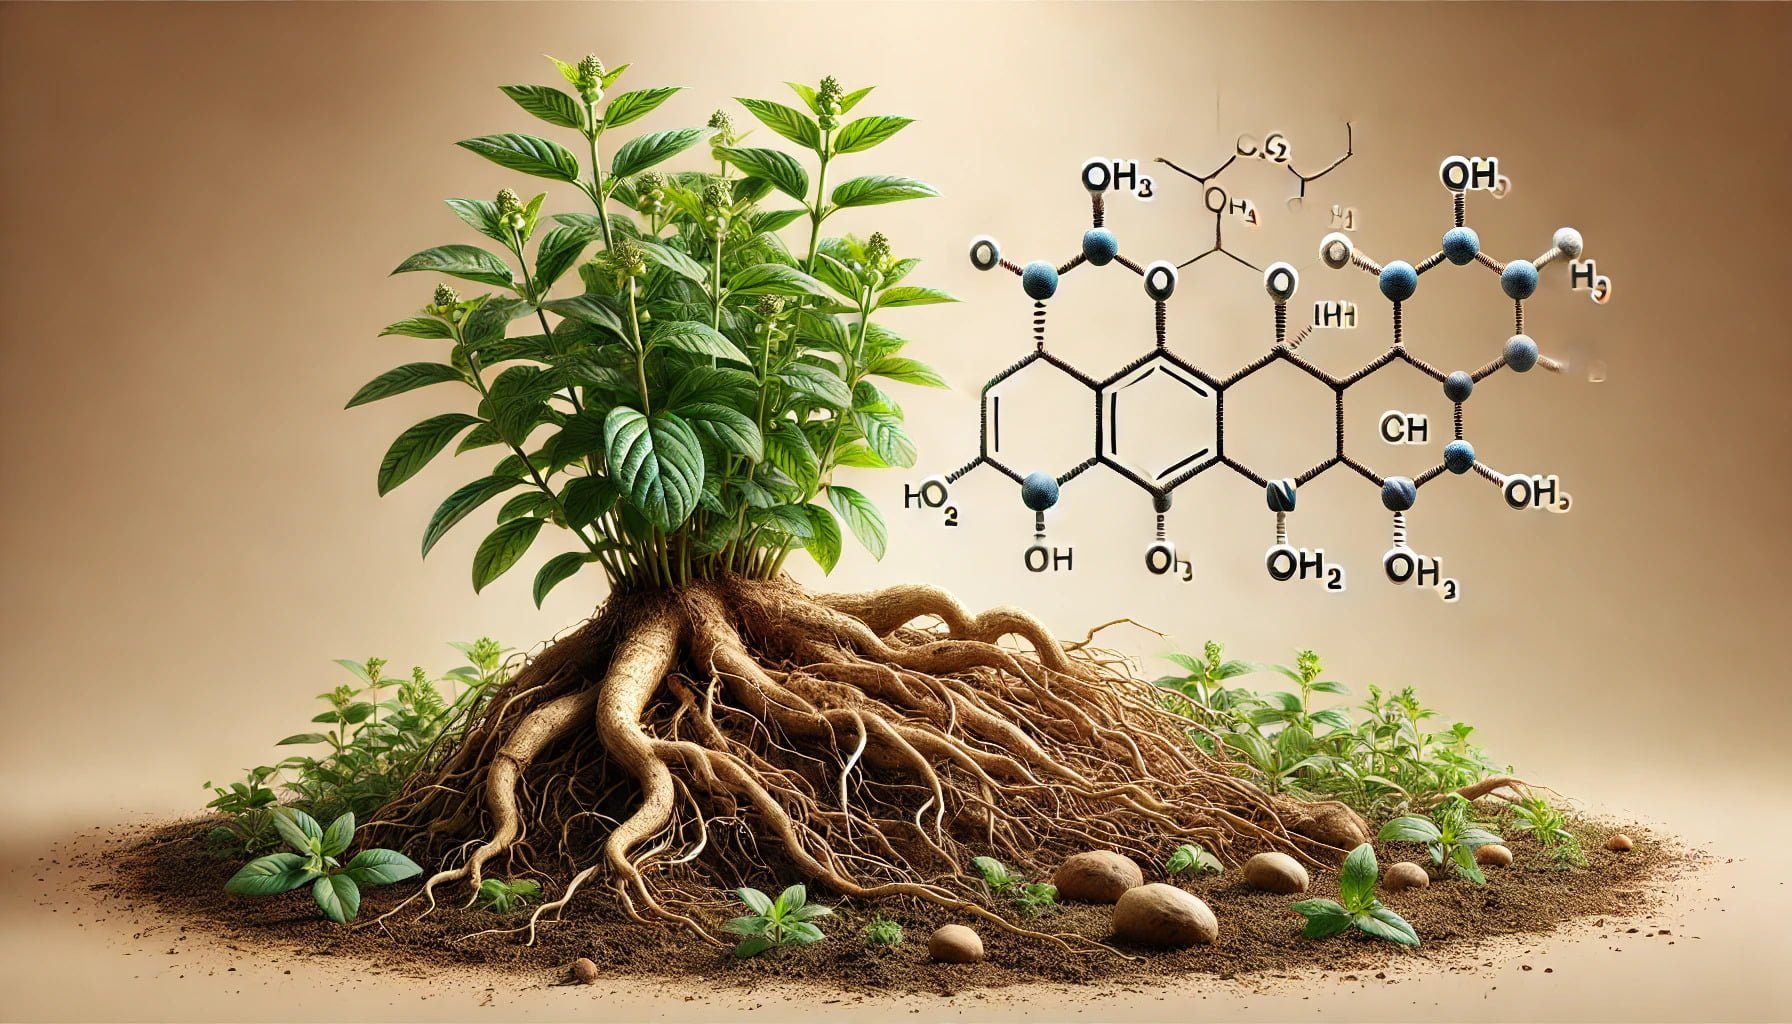 A photorealistic image of ashwagandha plant with it's molecular structure next to it. 